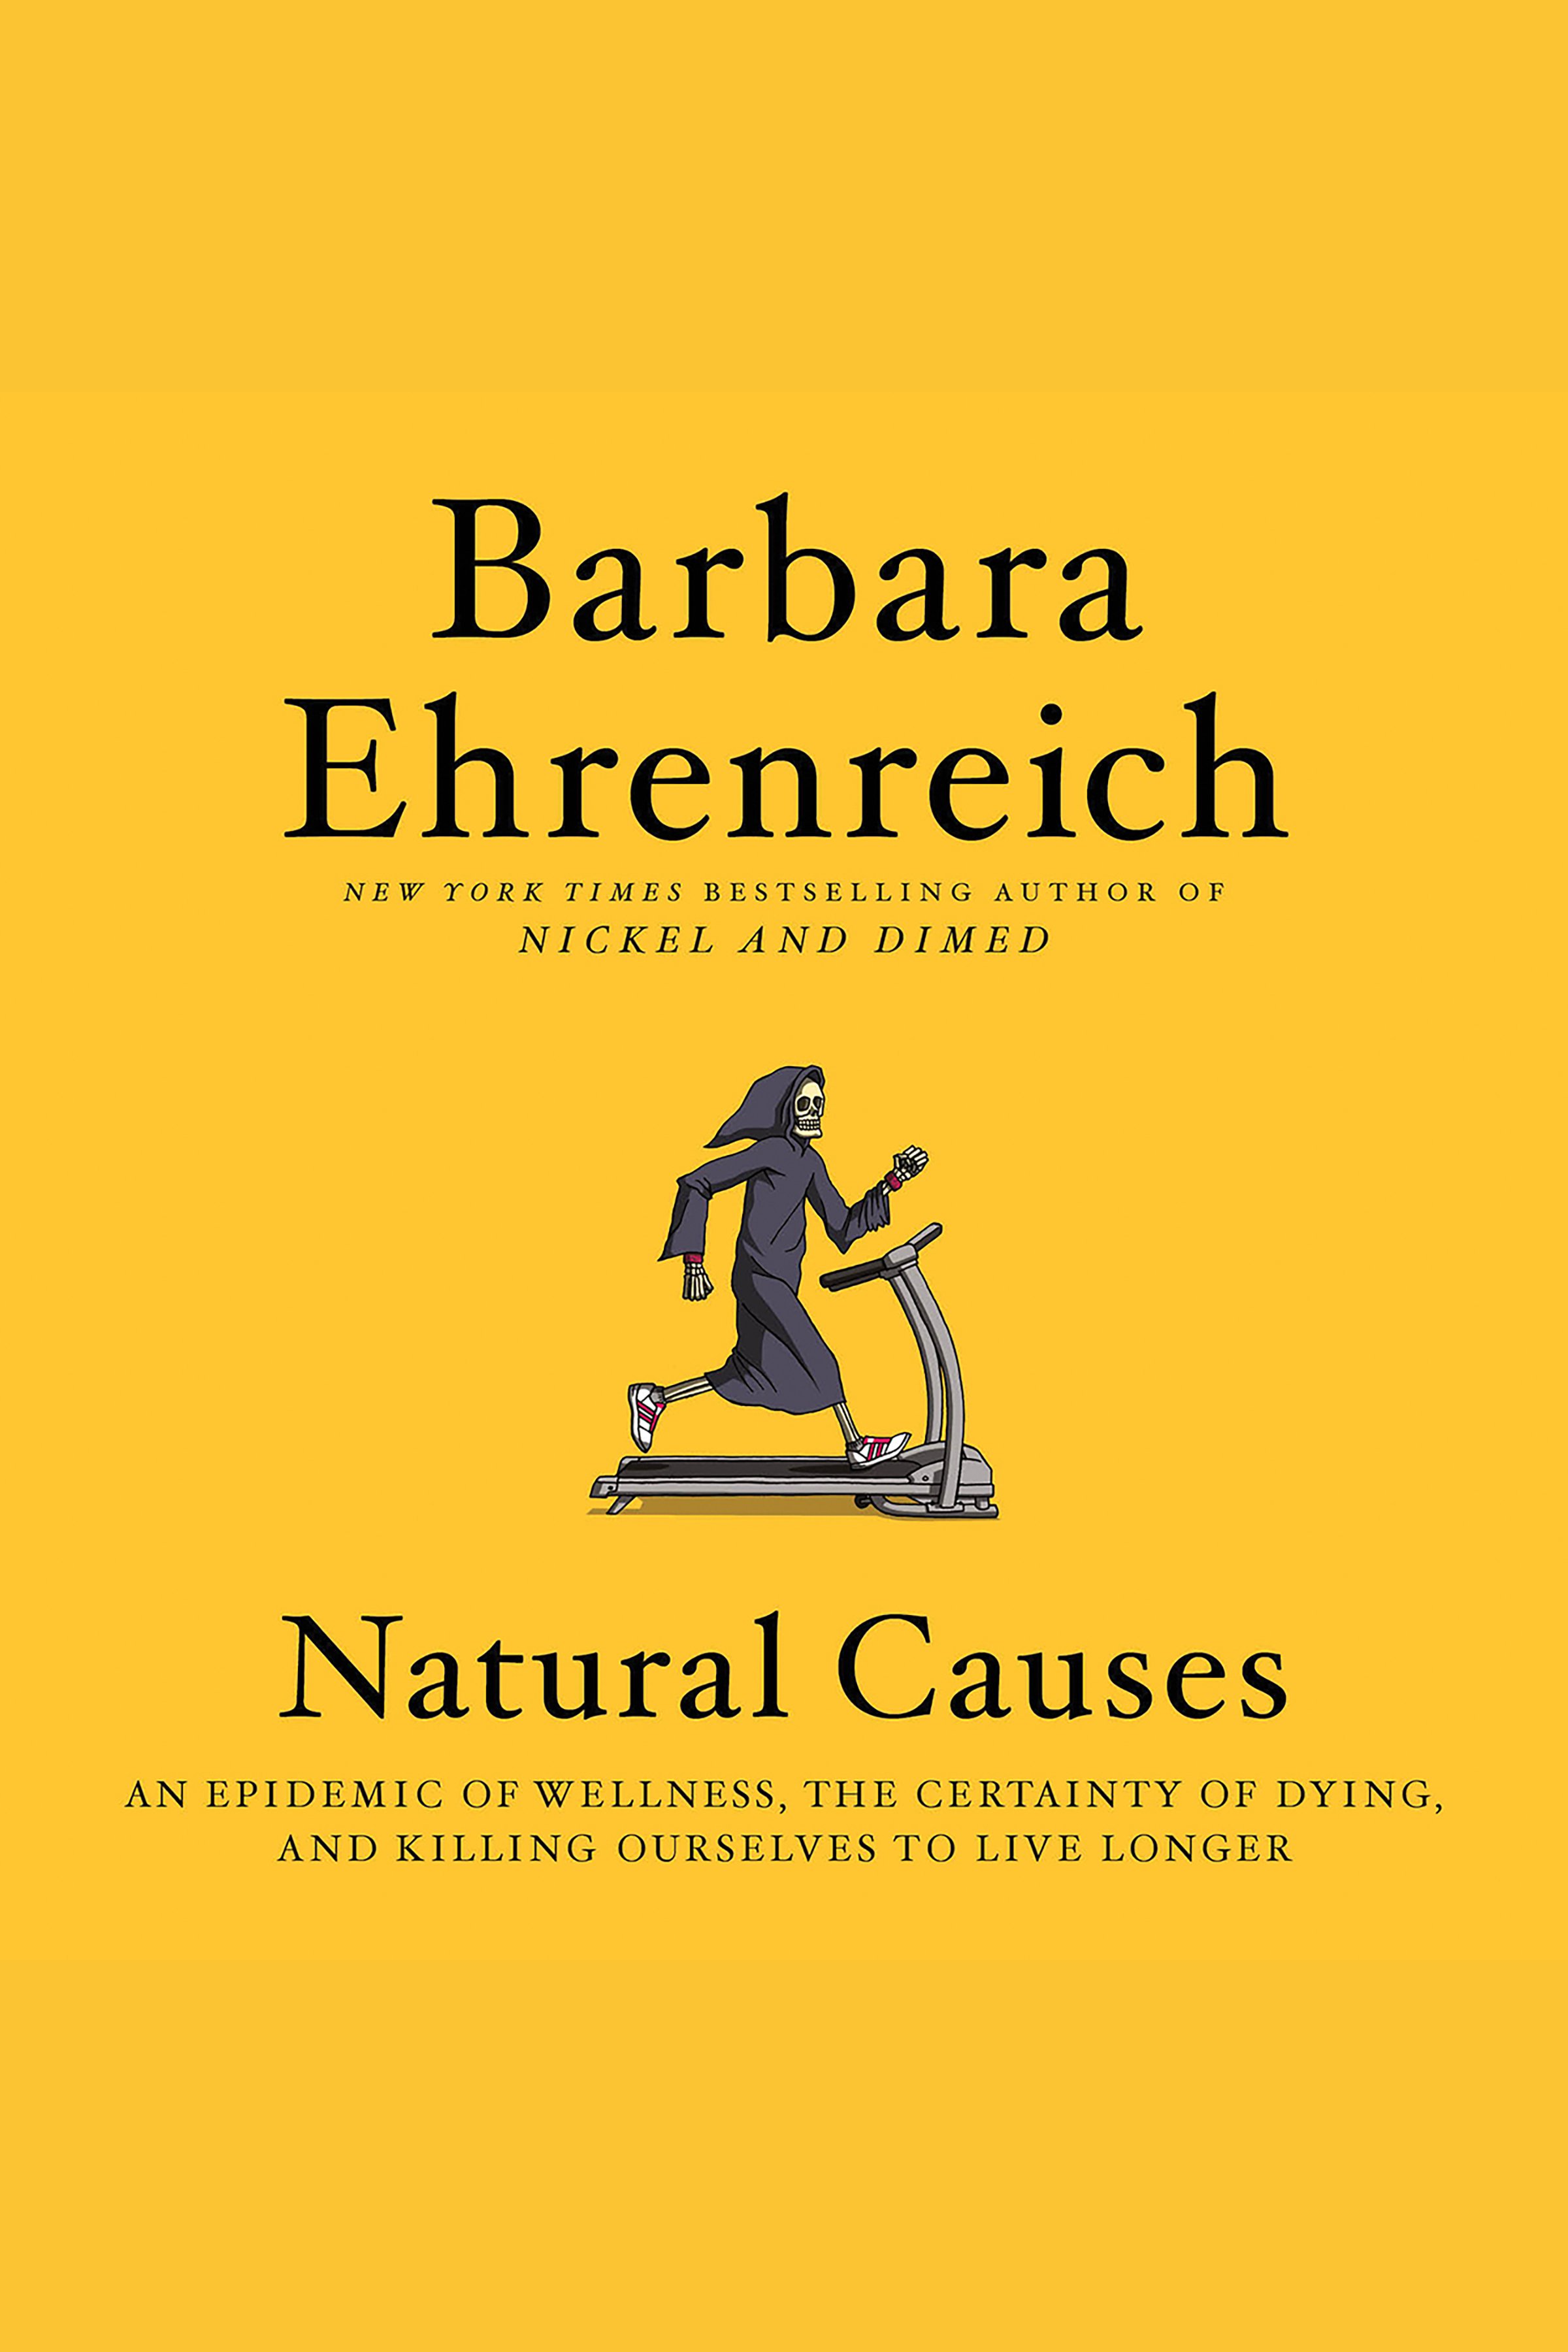 Imagen de portada para Natural Causes [electronic resource] : An Epidemic of Wellness, the Certainty of Dying, and Killing Ourselves to Live Longer